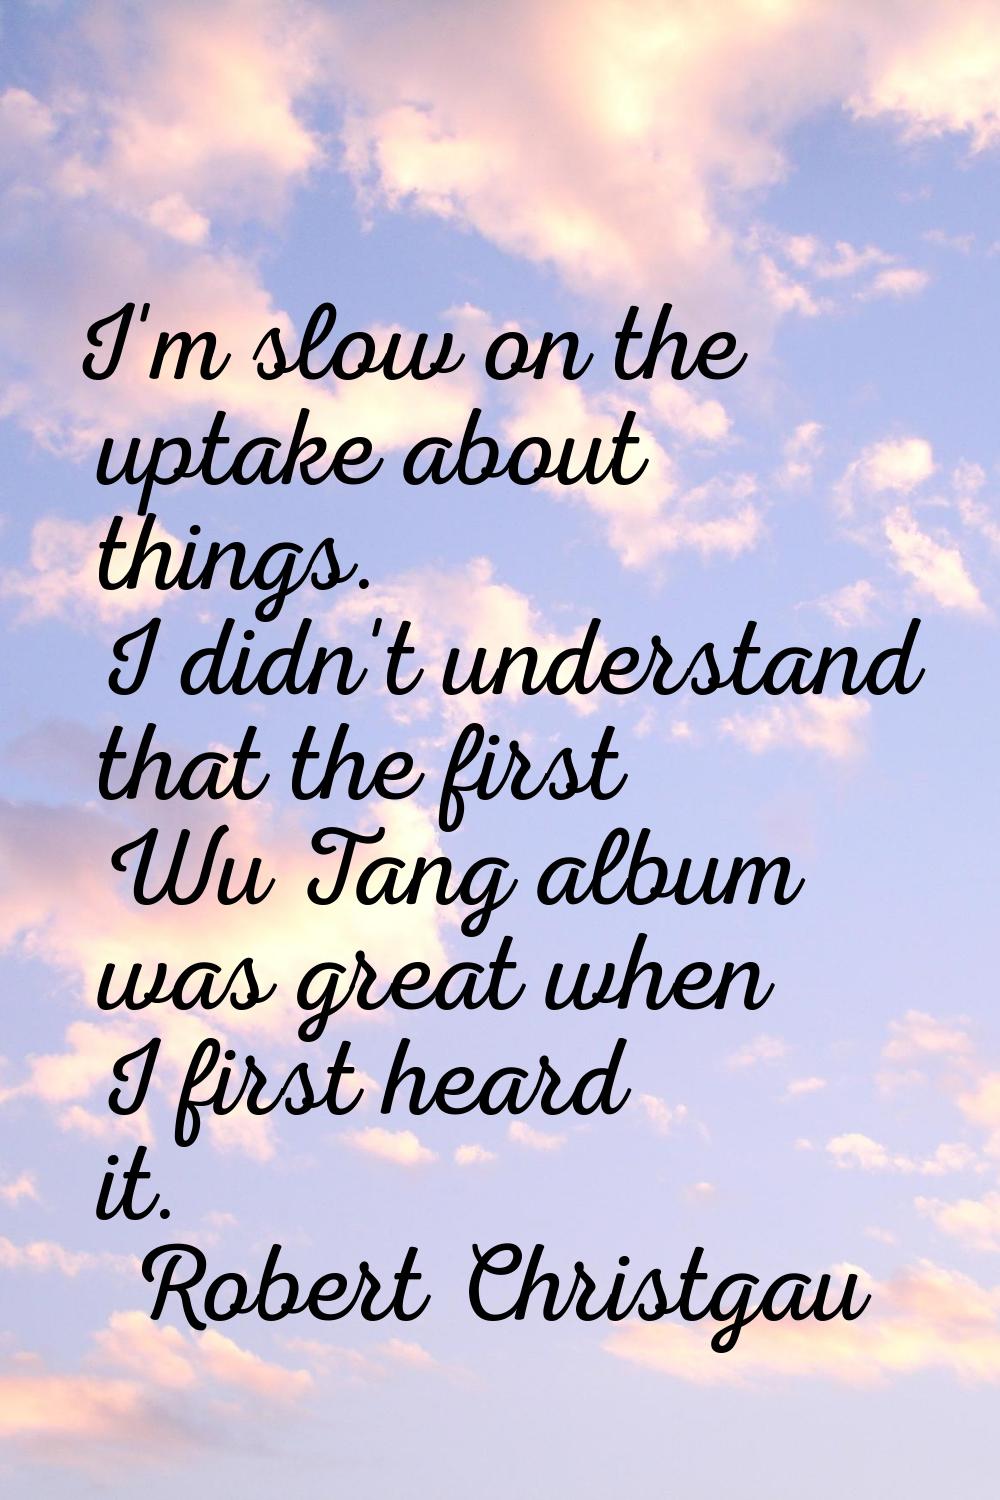 I'm slow on the uptake about things. I didn't understand that the first Wu Tang album was great whe